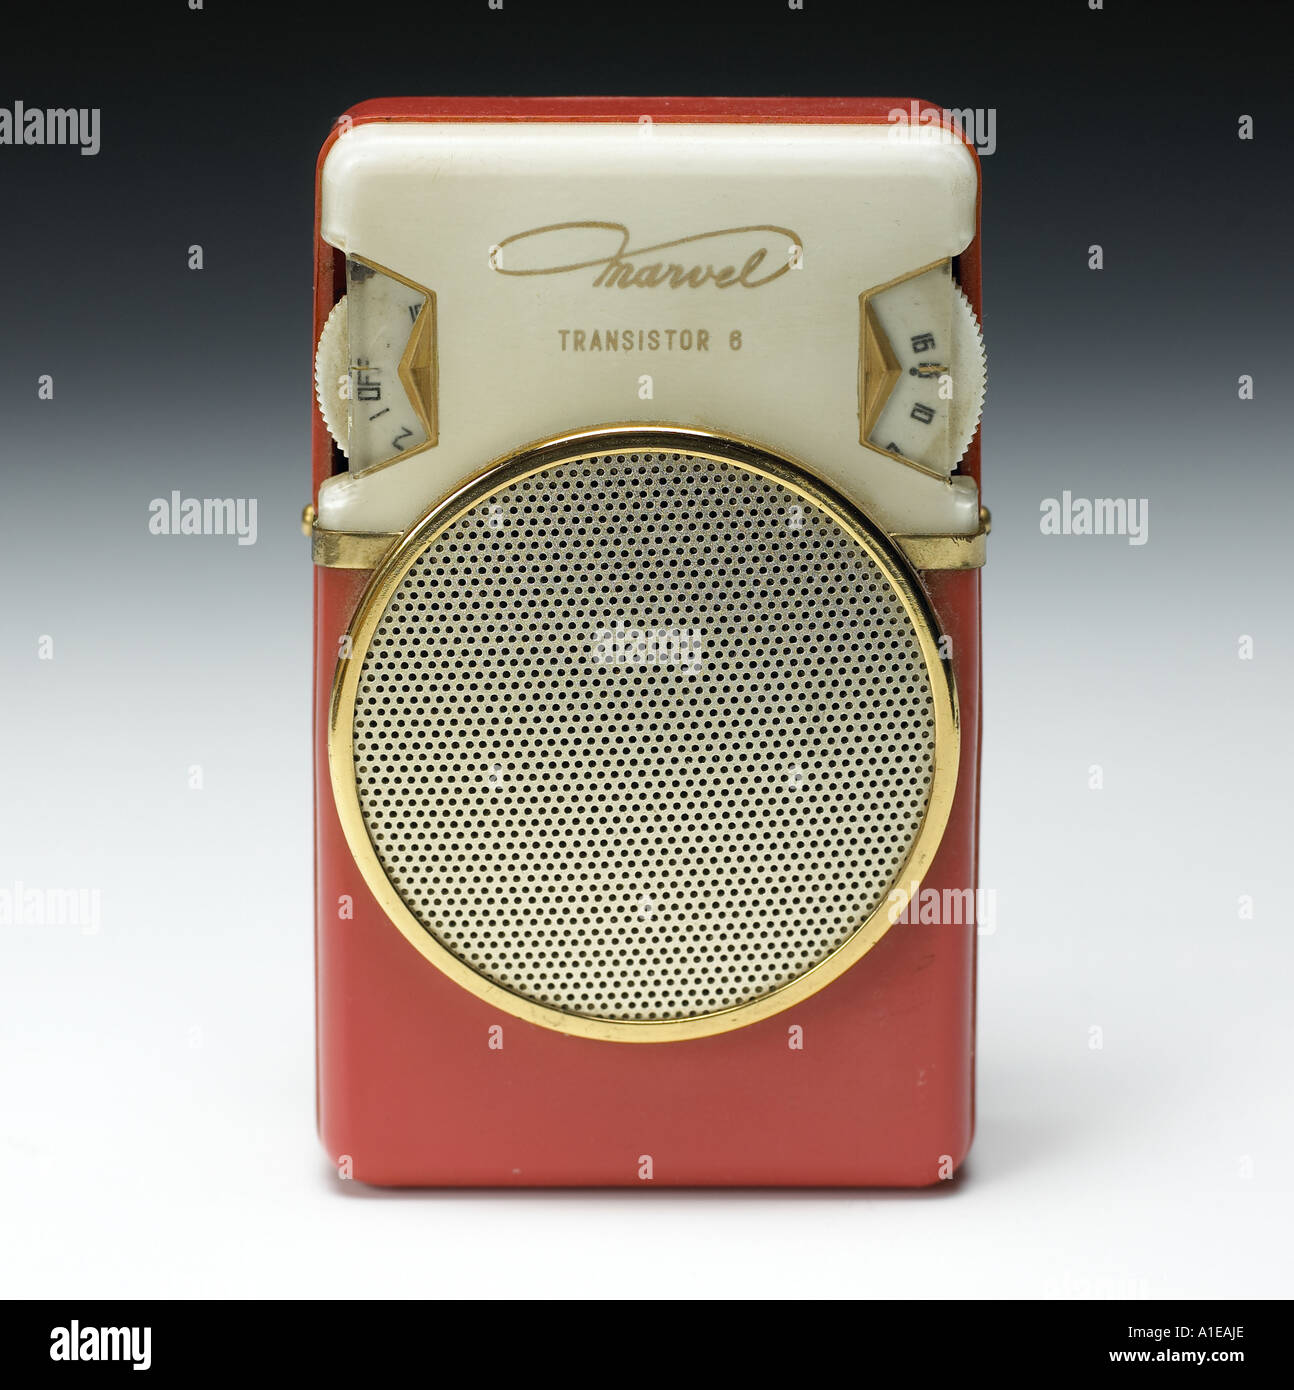 Transistor Radio 1950s High Resolution Stock Photography and Images - Alamy